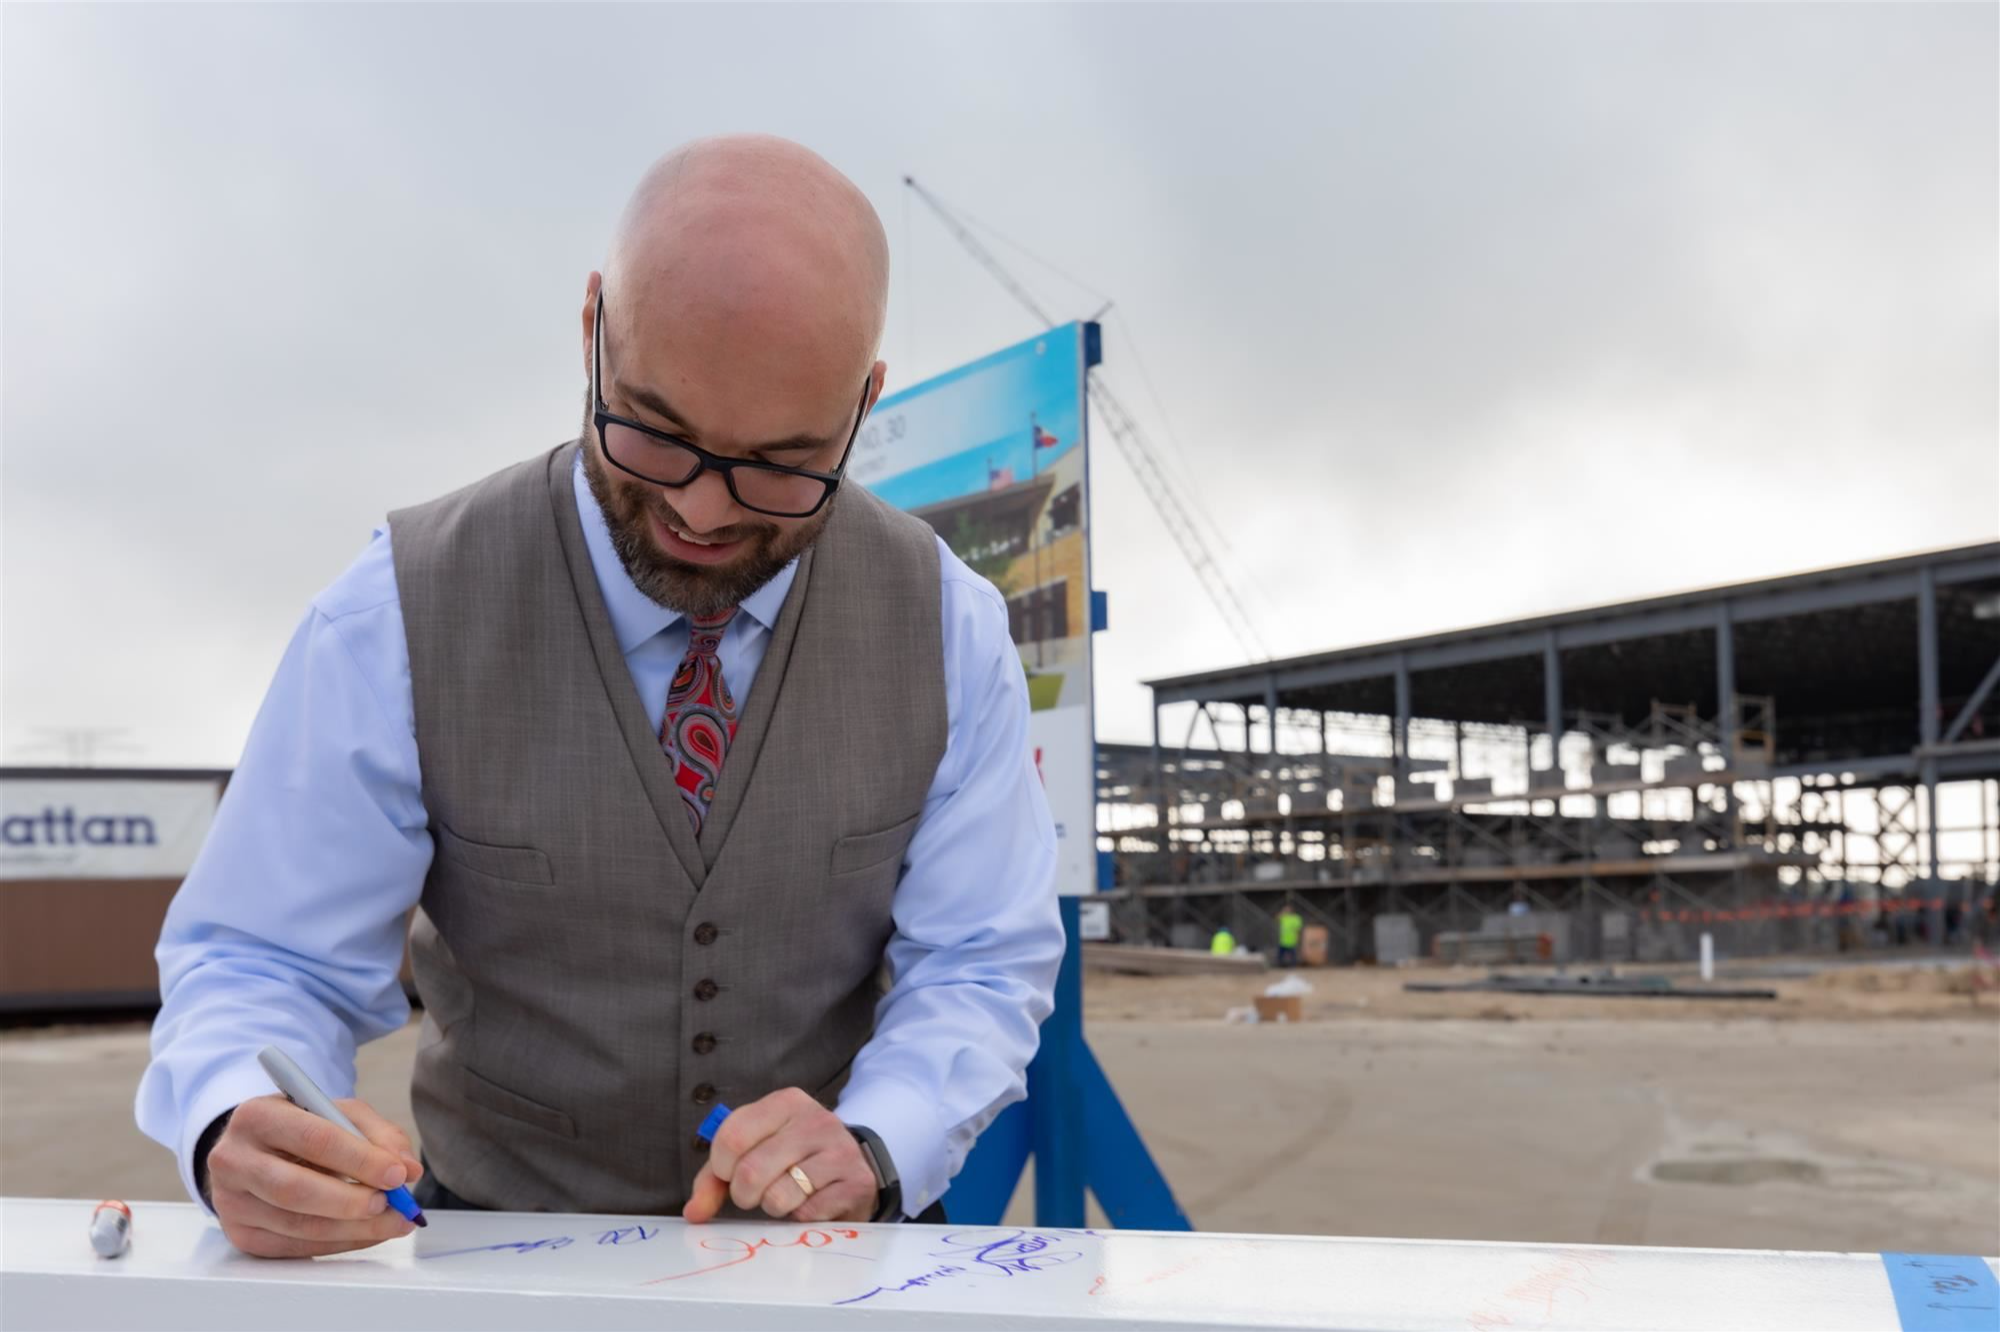 Paul Edwards, the founding principal of Elementary School #30, signs a construction beam at the groundbreaking ceremony for Humble ISD's 30th elementary school. The school opens in August 2021.